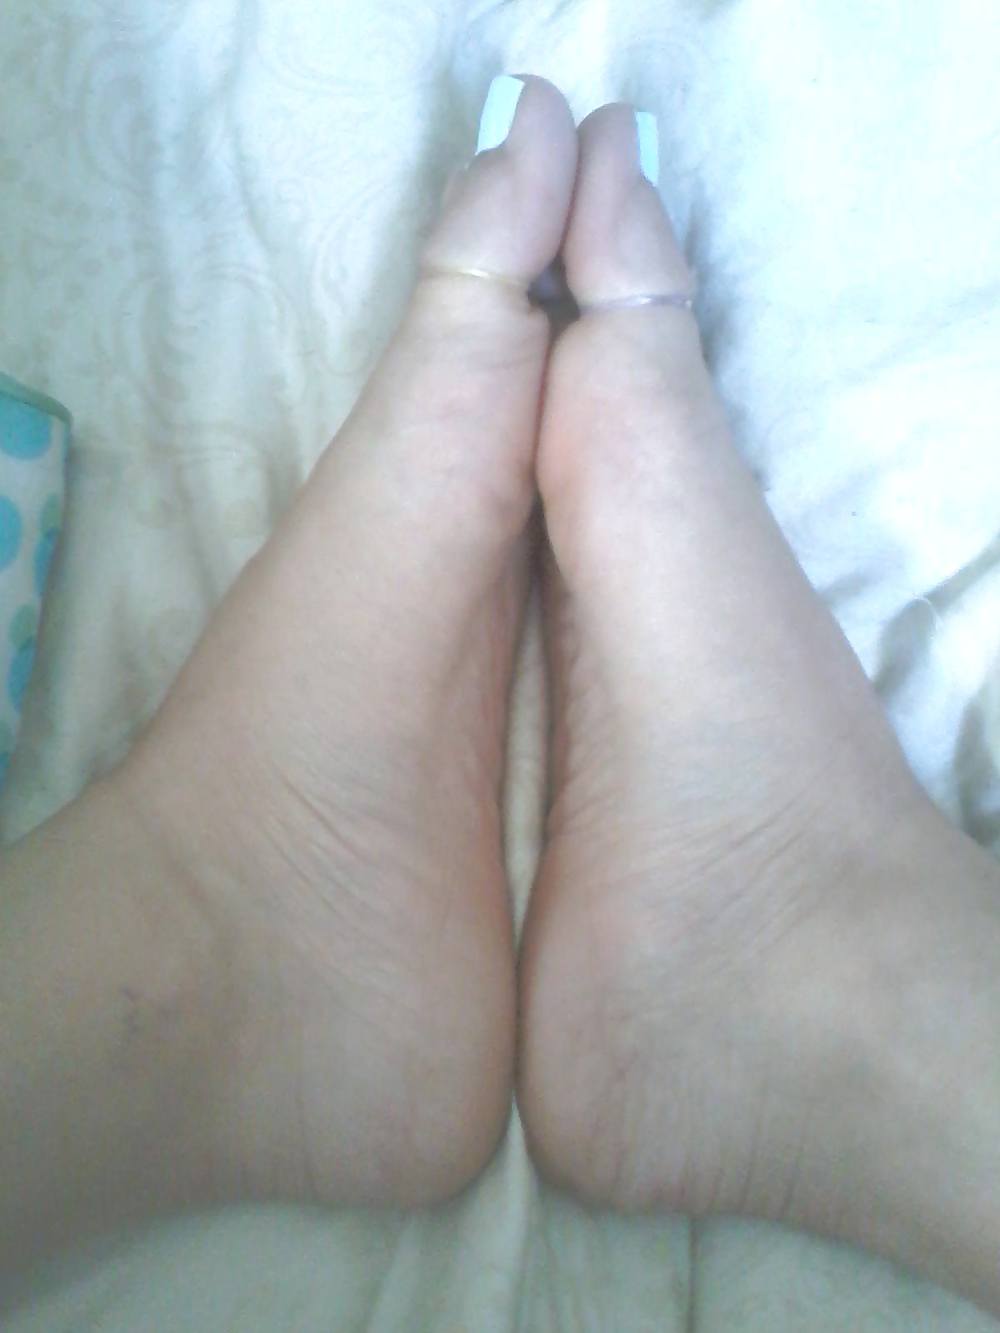 Foot pussy and arches soles #23385563